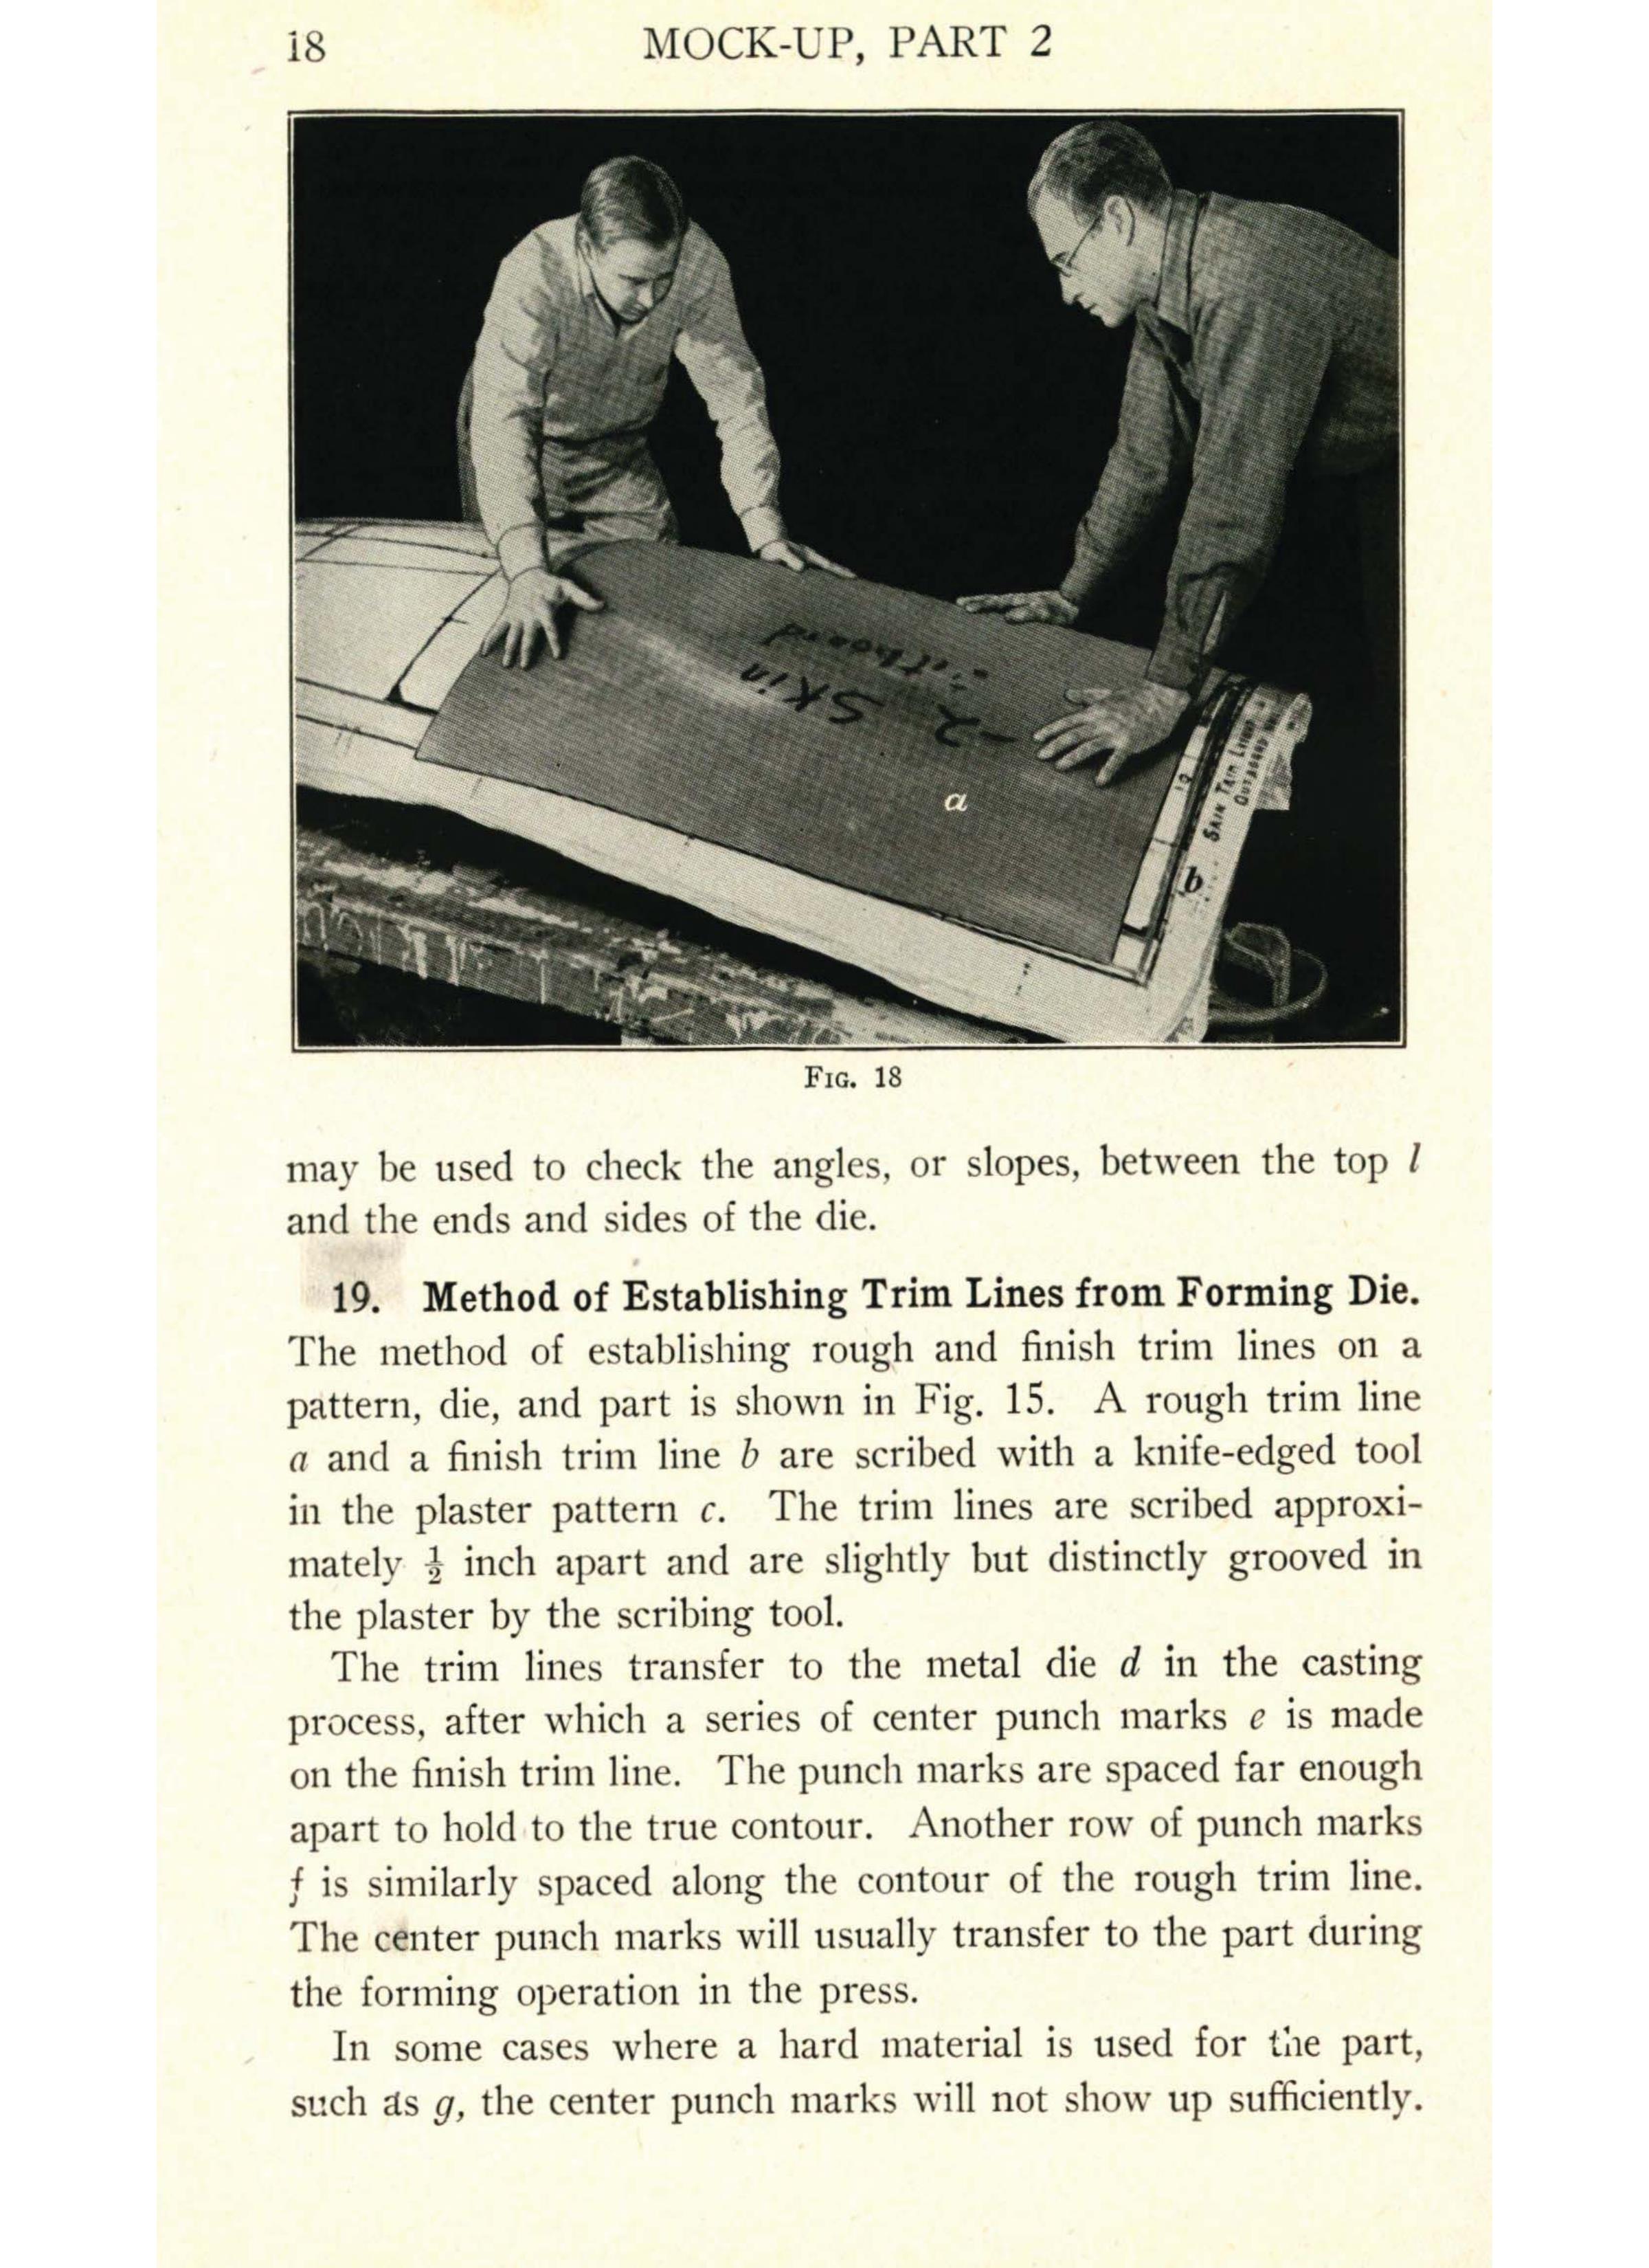 Sample page 20 from AirCorps Library document: Templets and Layout - Mock Up Part 2 - Bureau of Aeronautics